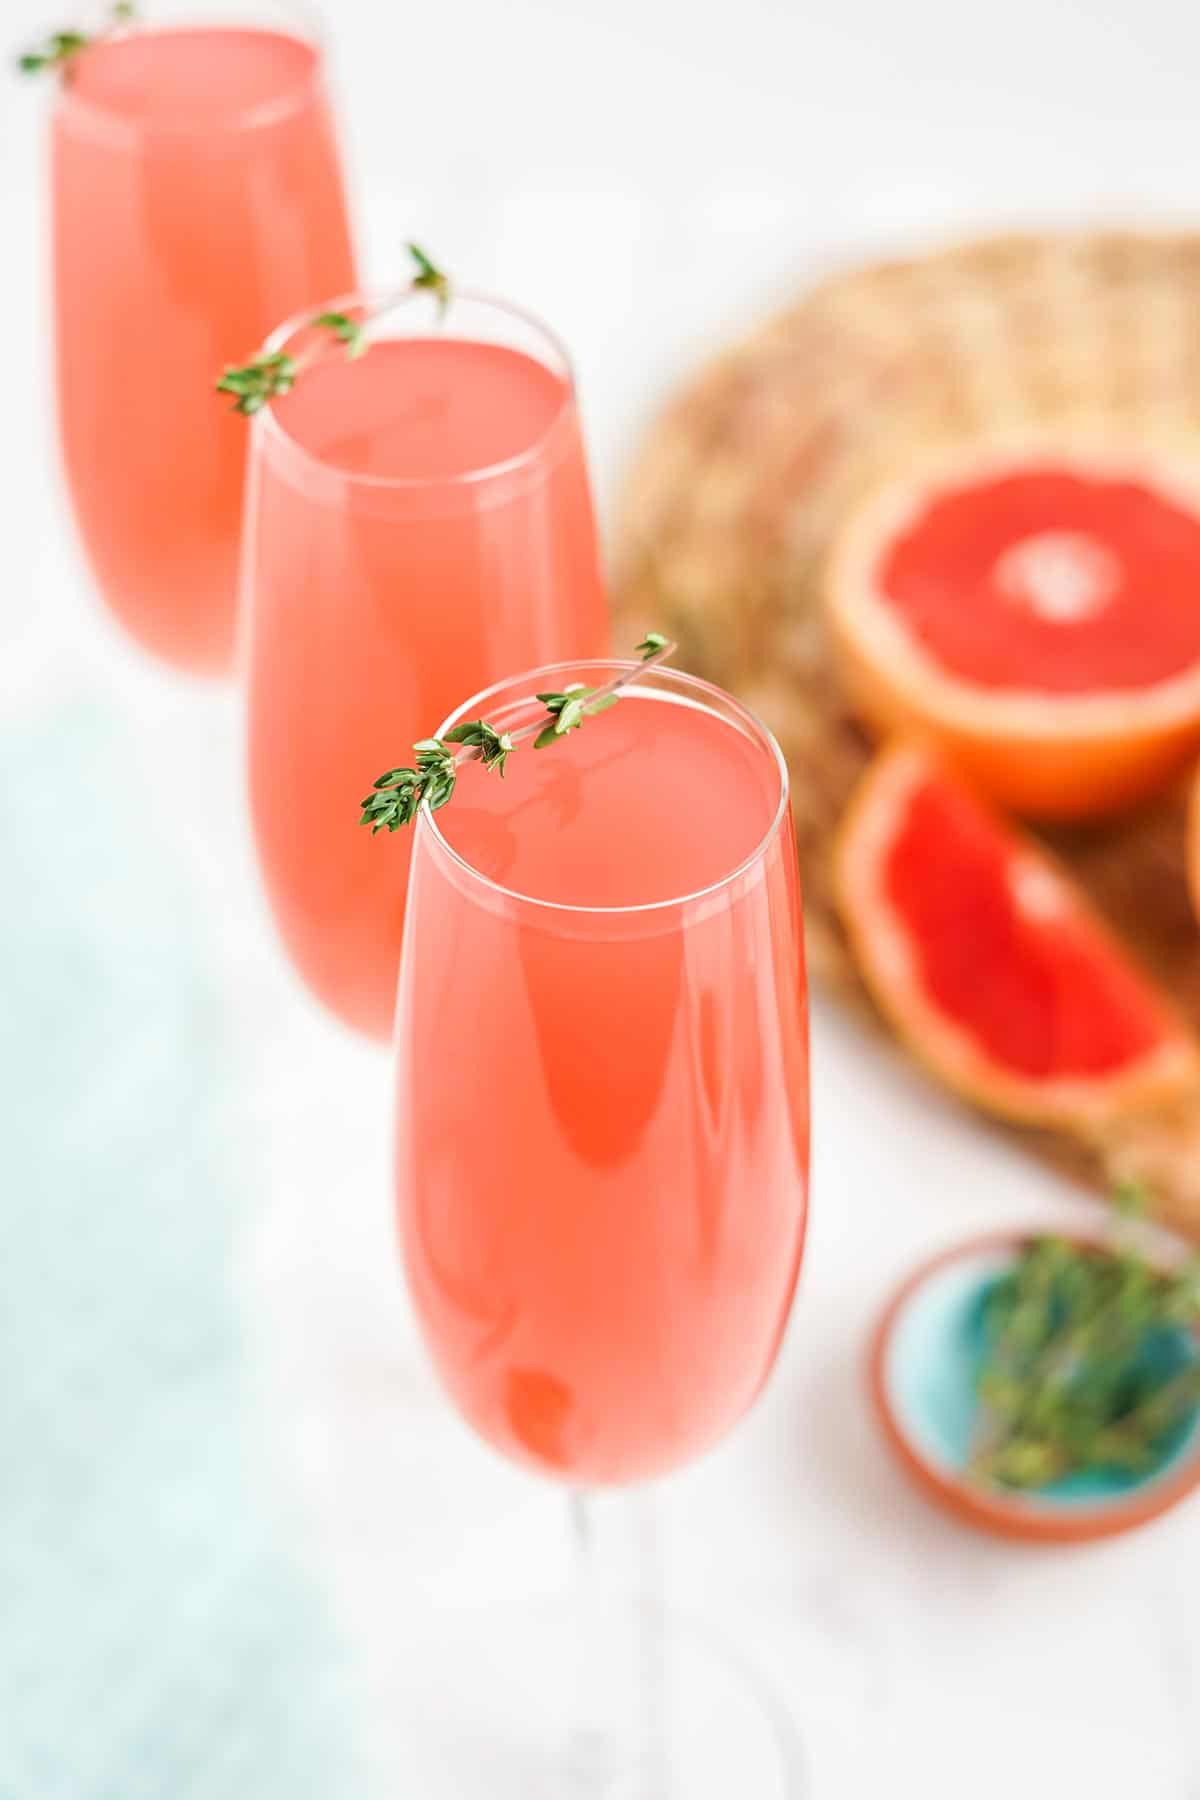 Three glasses of pink grapefruit mimosa on the table in a diagonal.